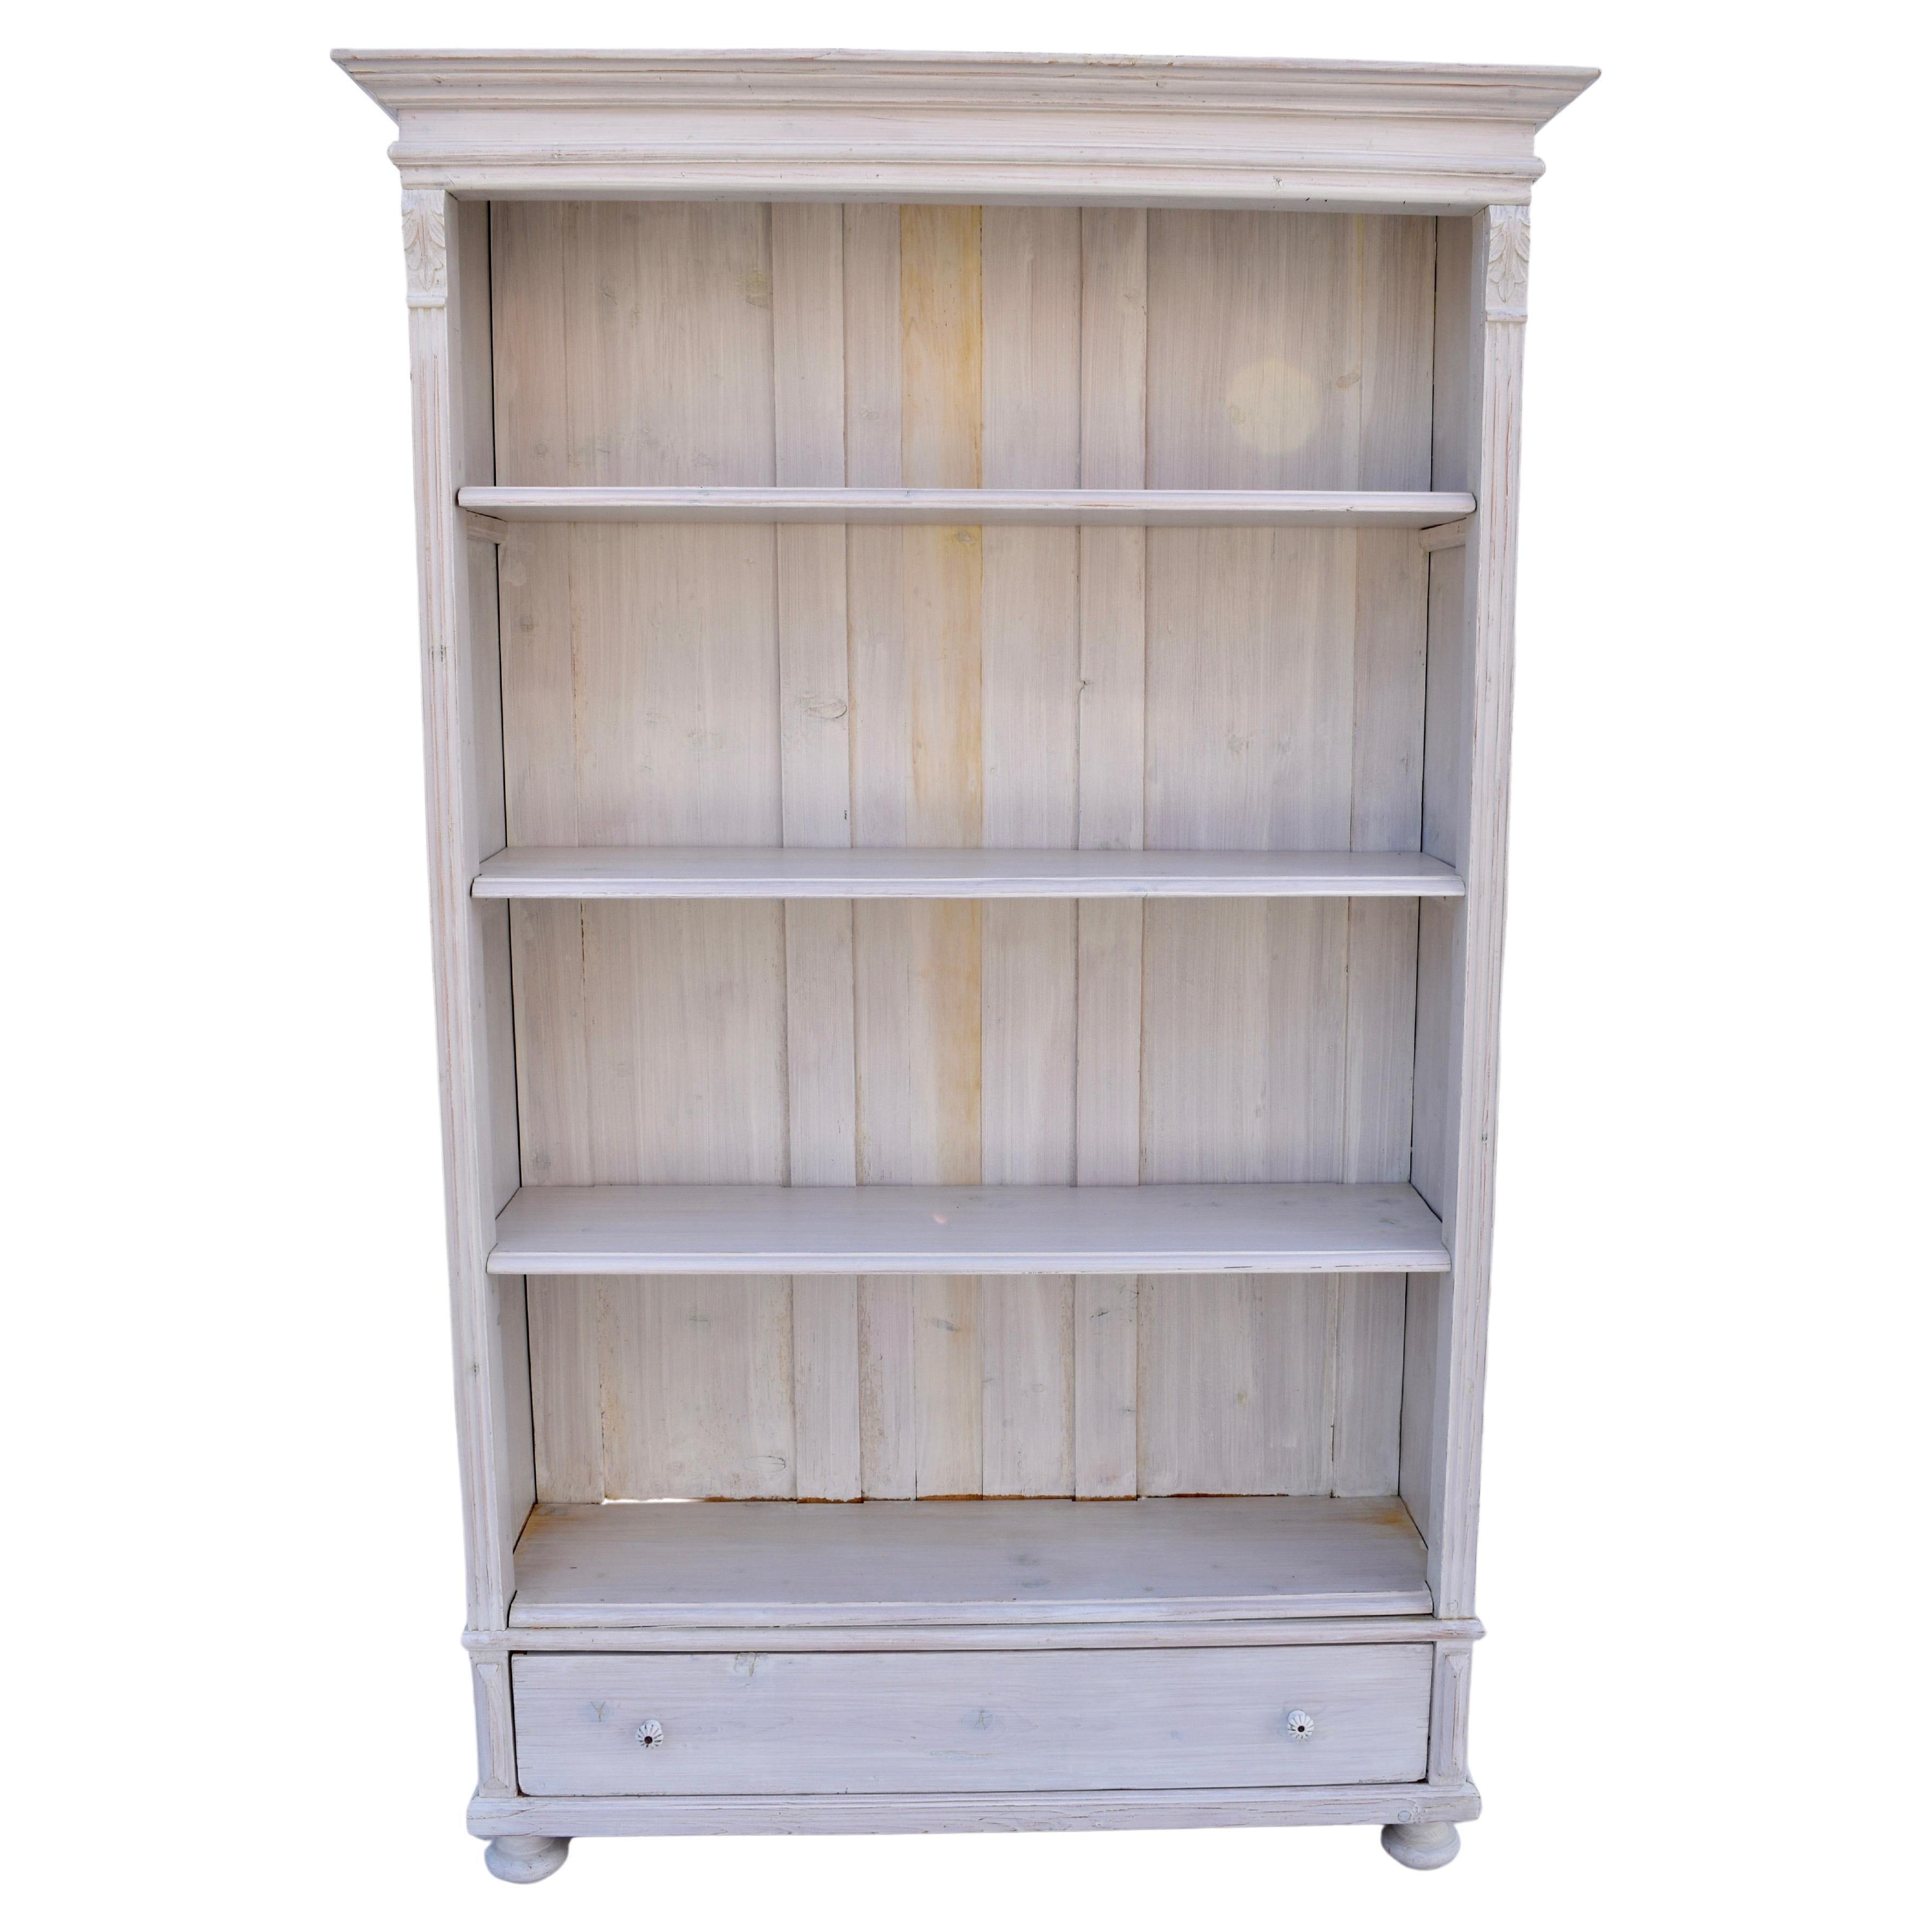 Painted Pine Bookcase from Vintage Armoire